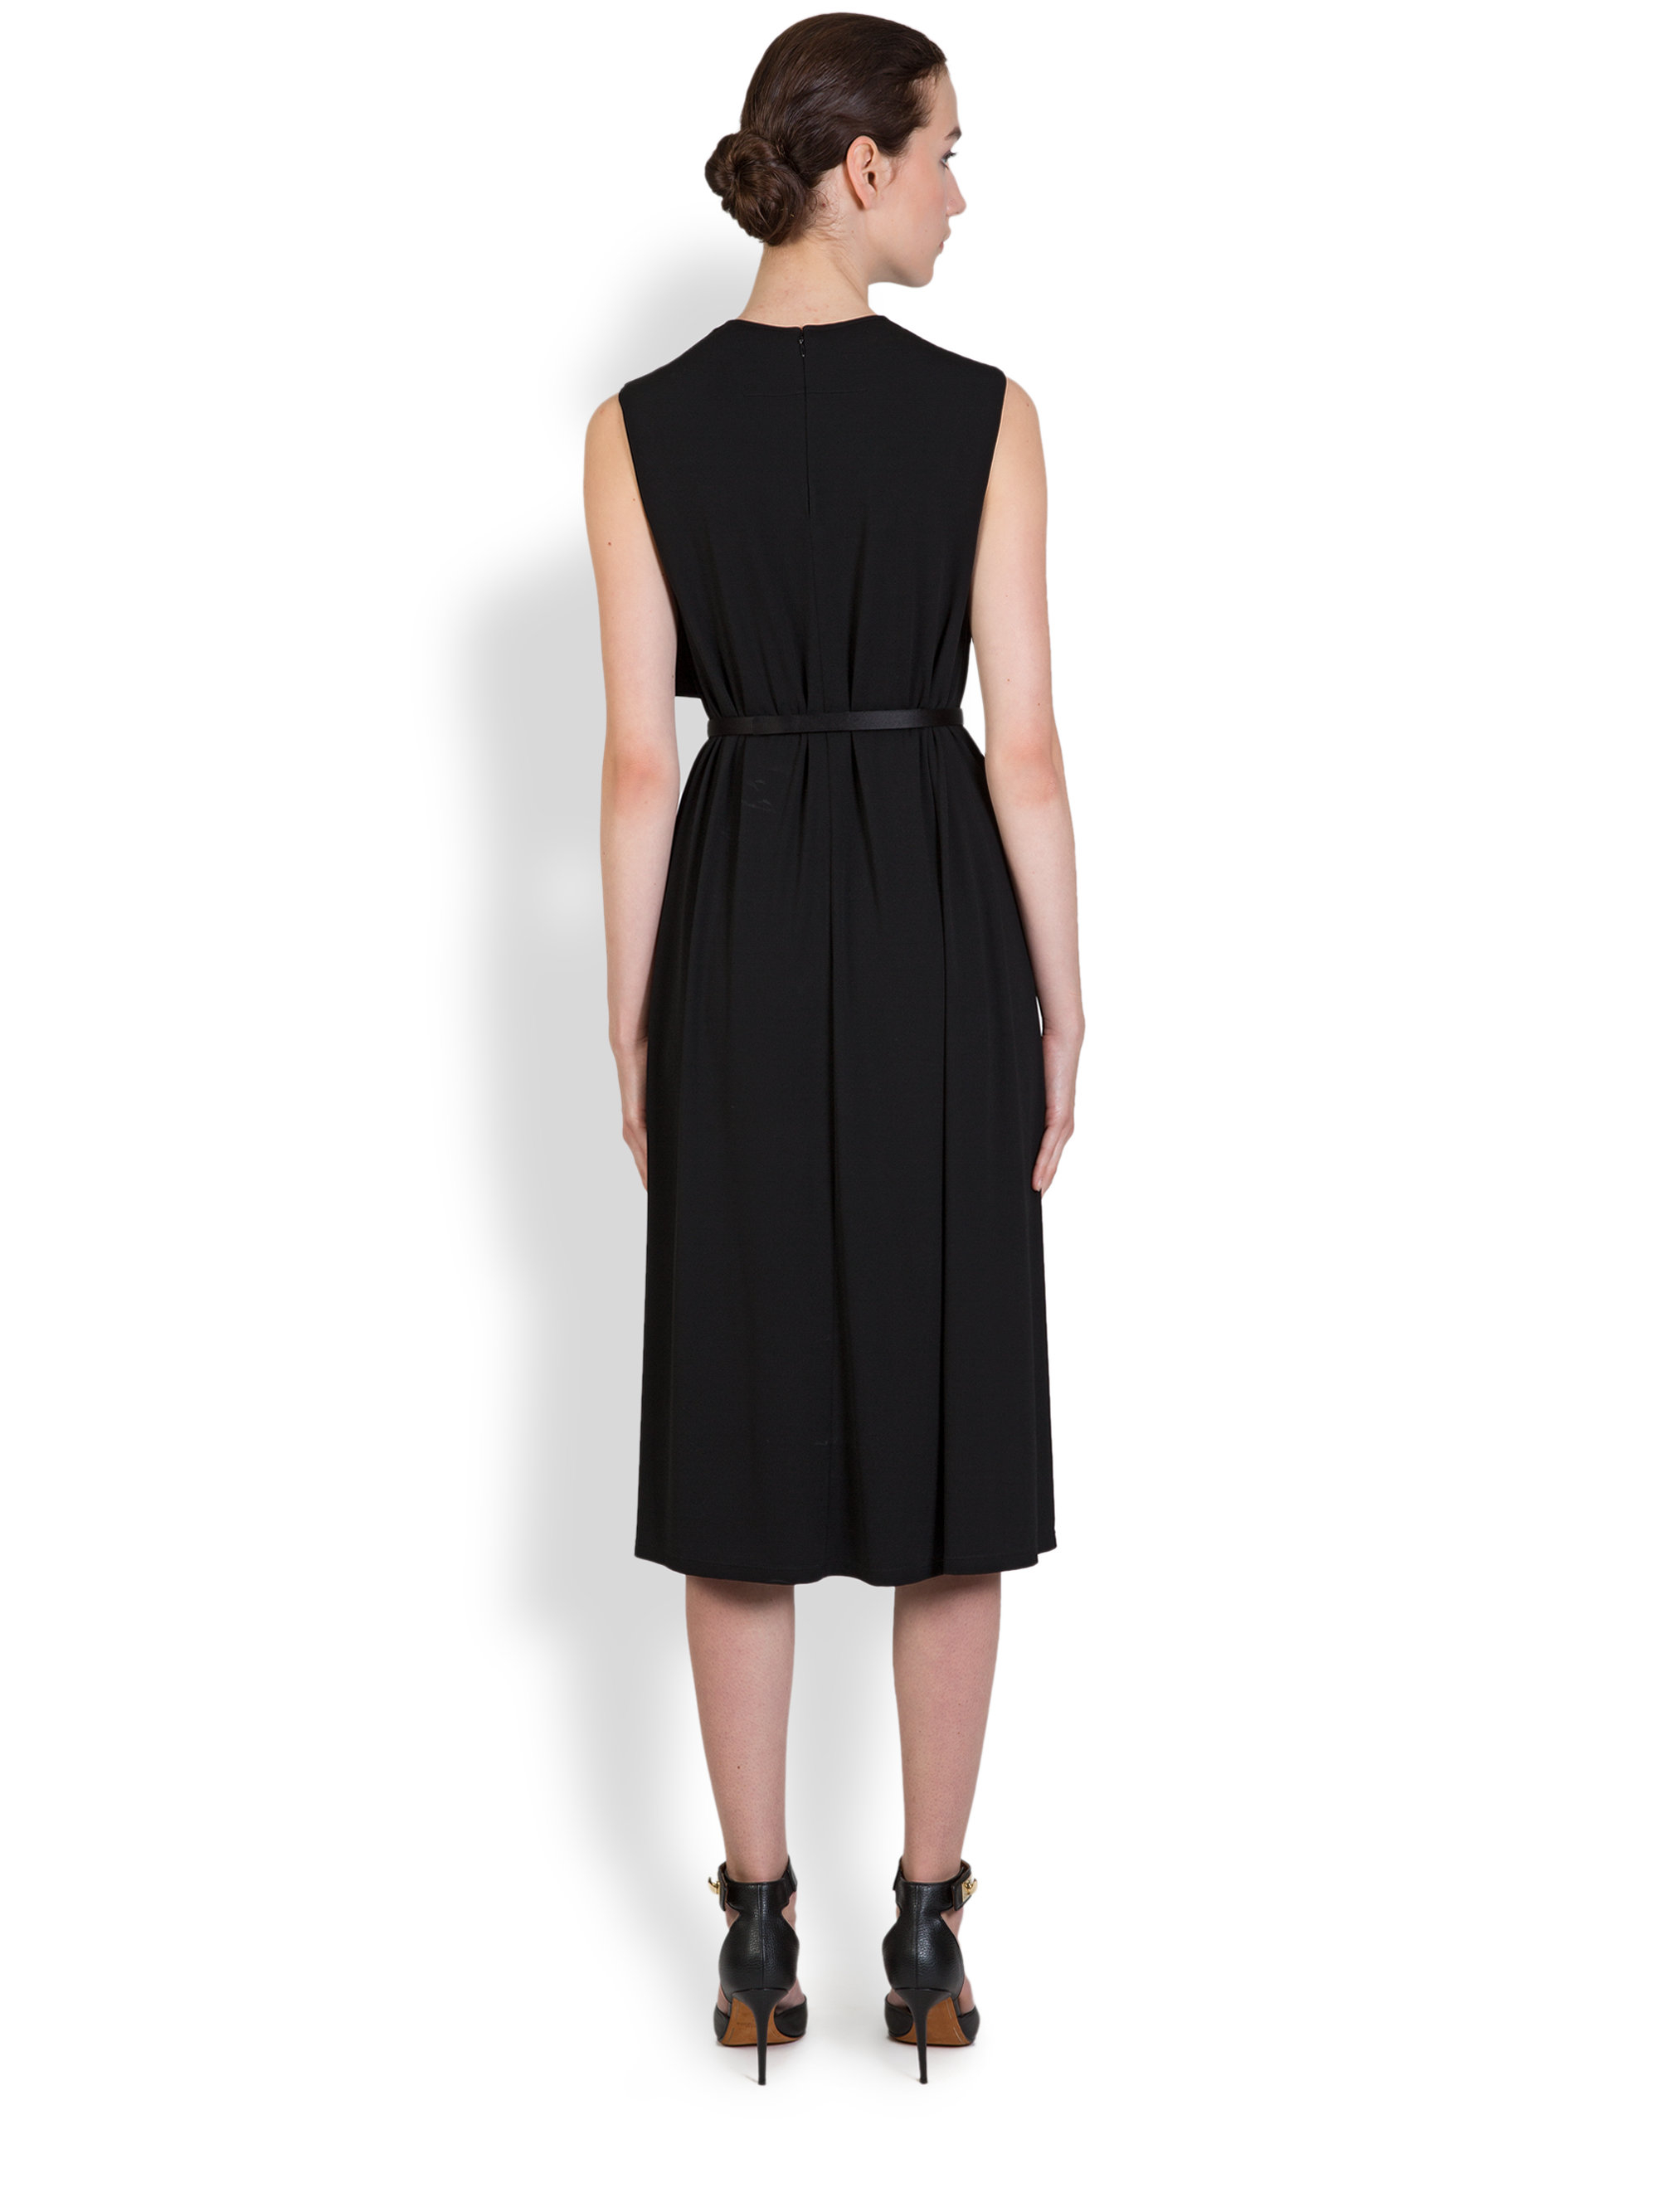 Lyst - Givenchy Capelet Jersey Dress in Black